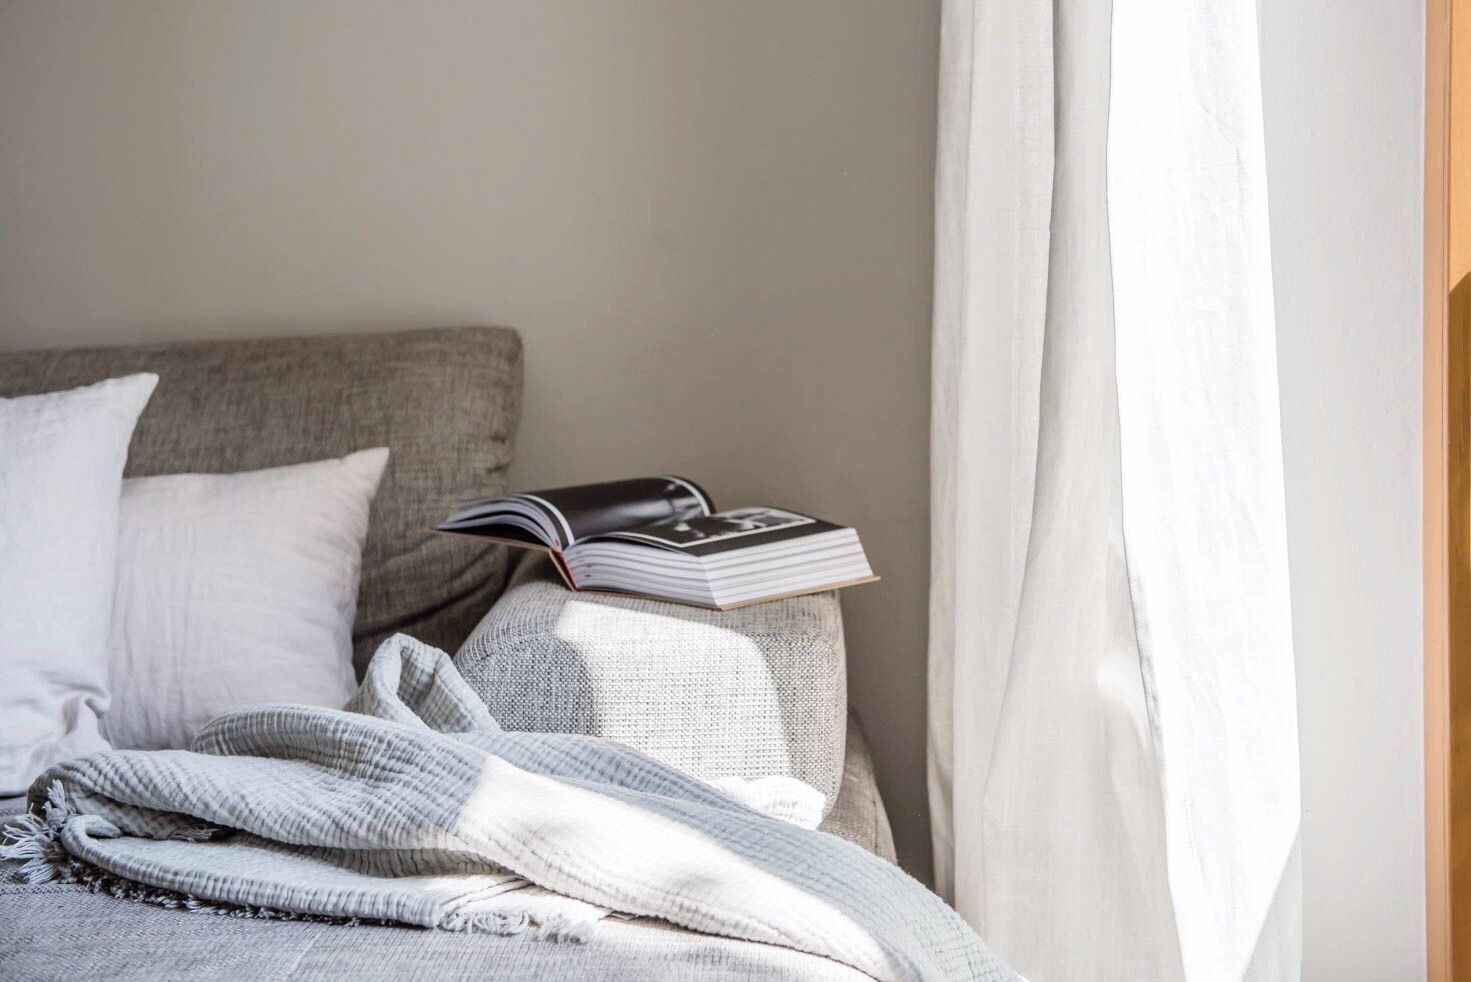 9 Essentials You Need to Make Your Home Feel Cozy